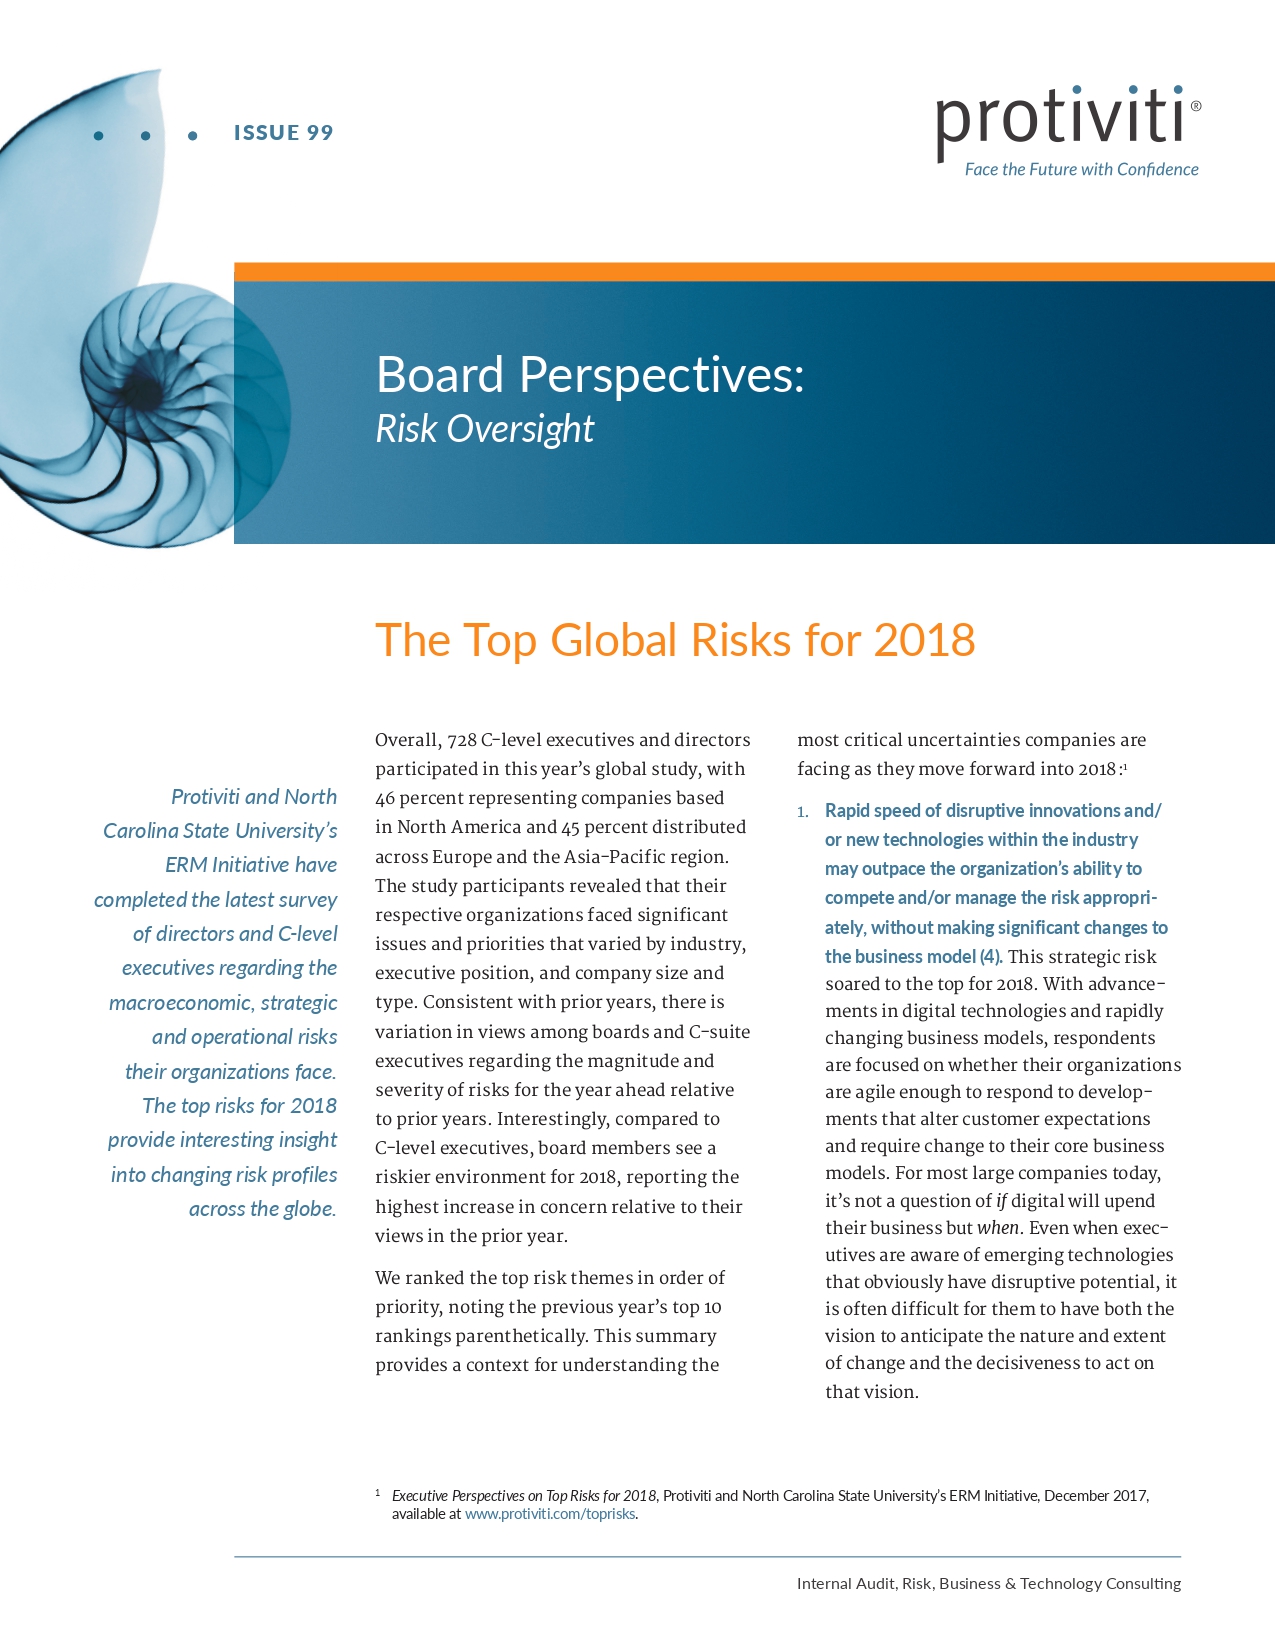 Screenshot of the first page of The Top Global Risks for 2018 - Board Perspectives - Risk Oversight, Issue 99